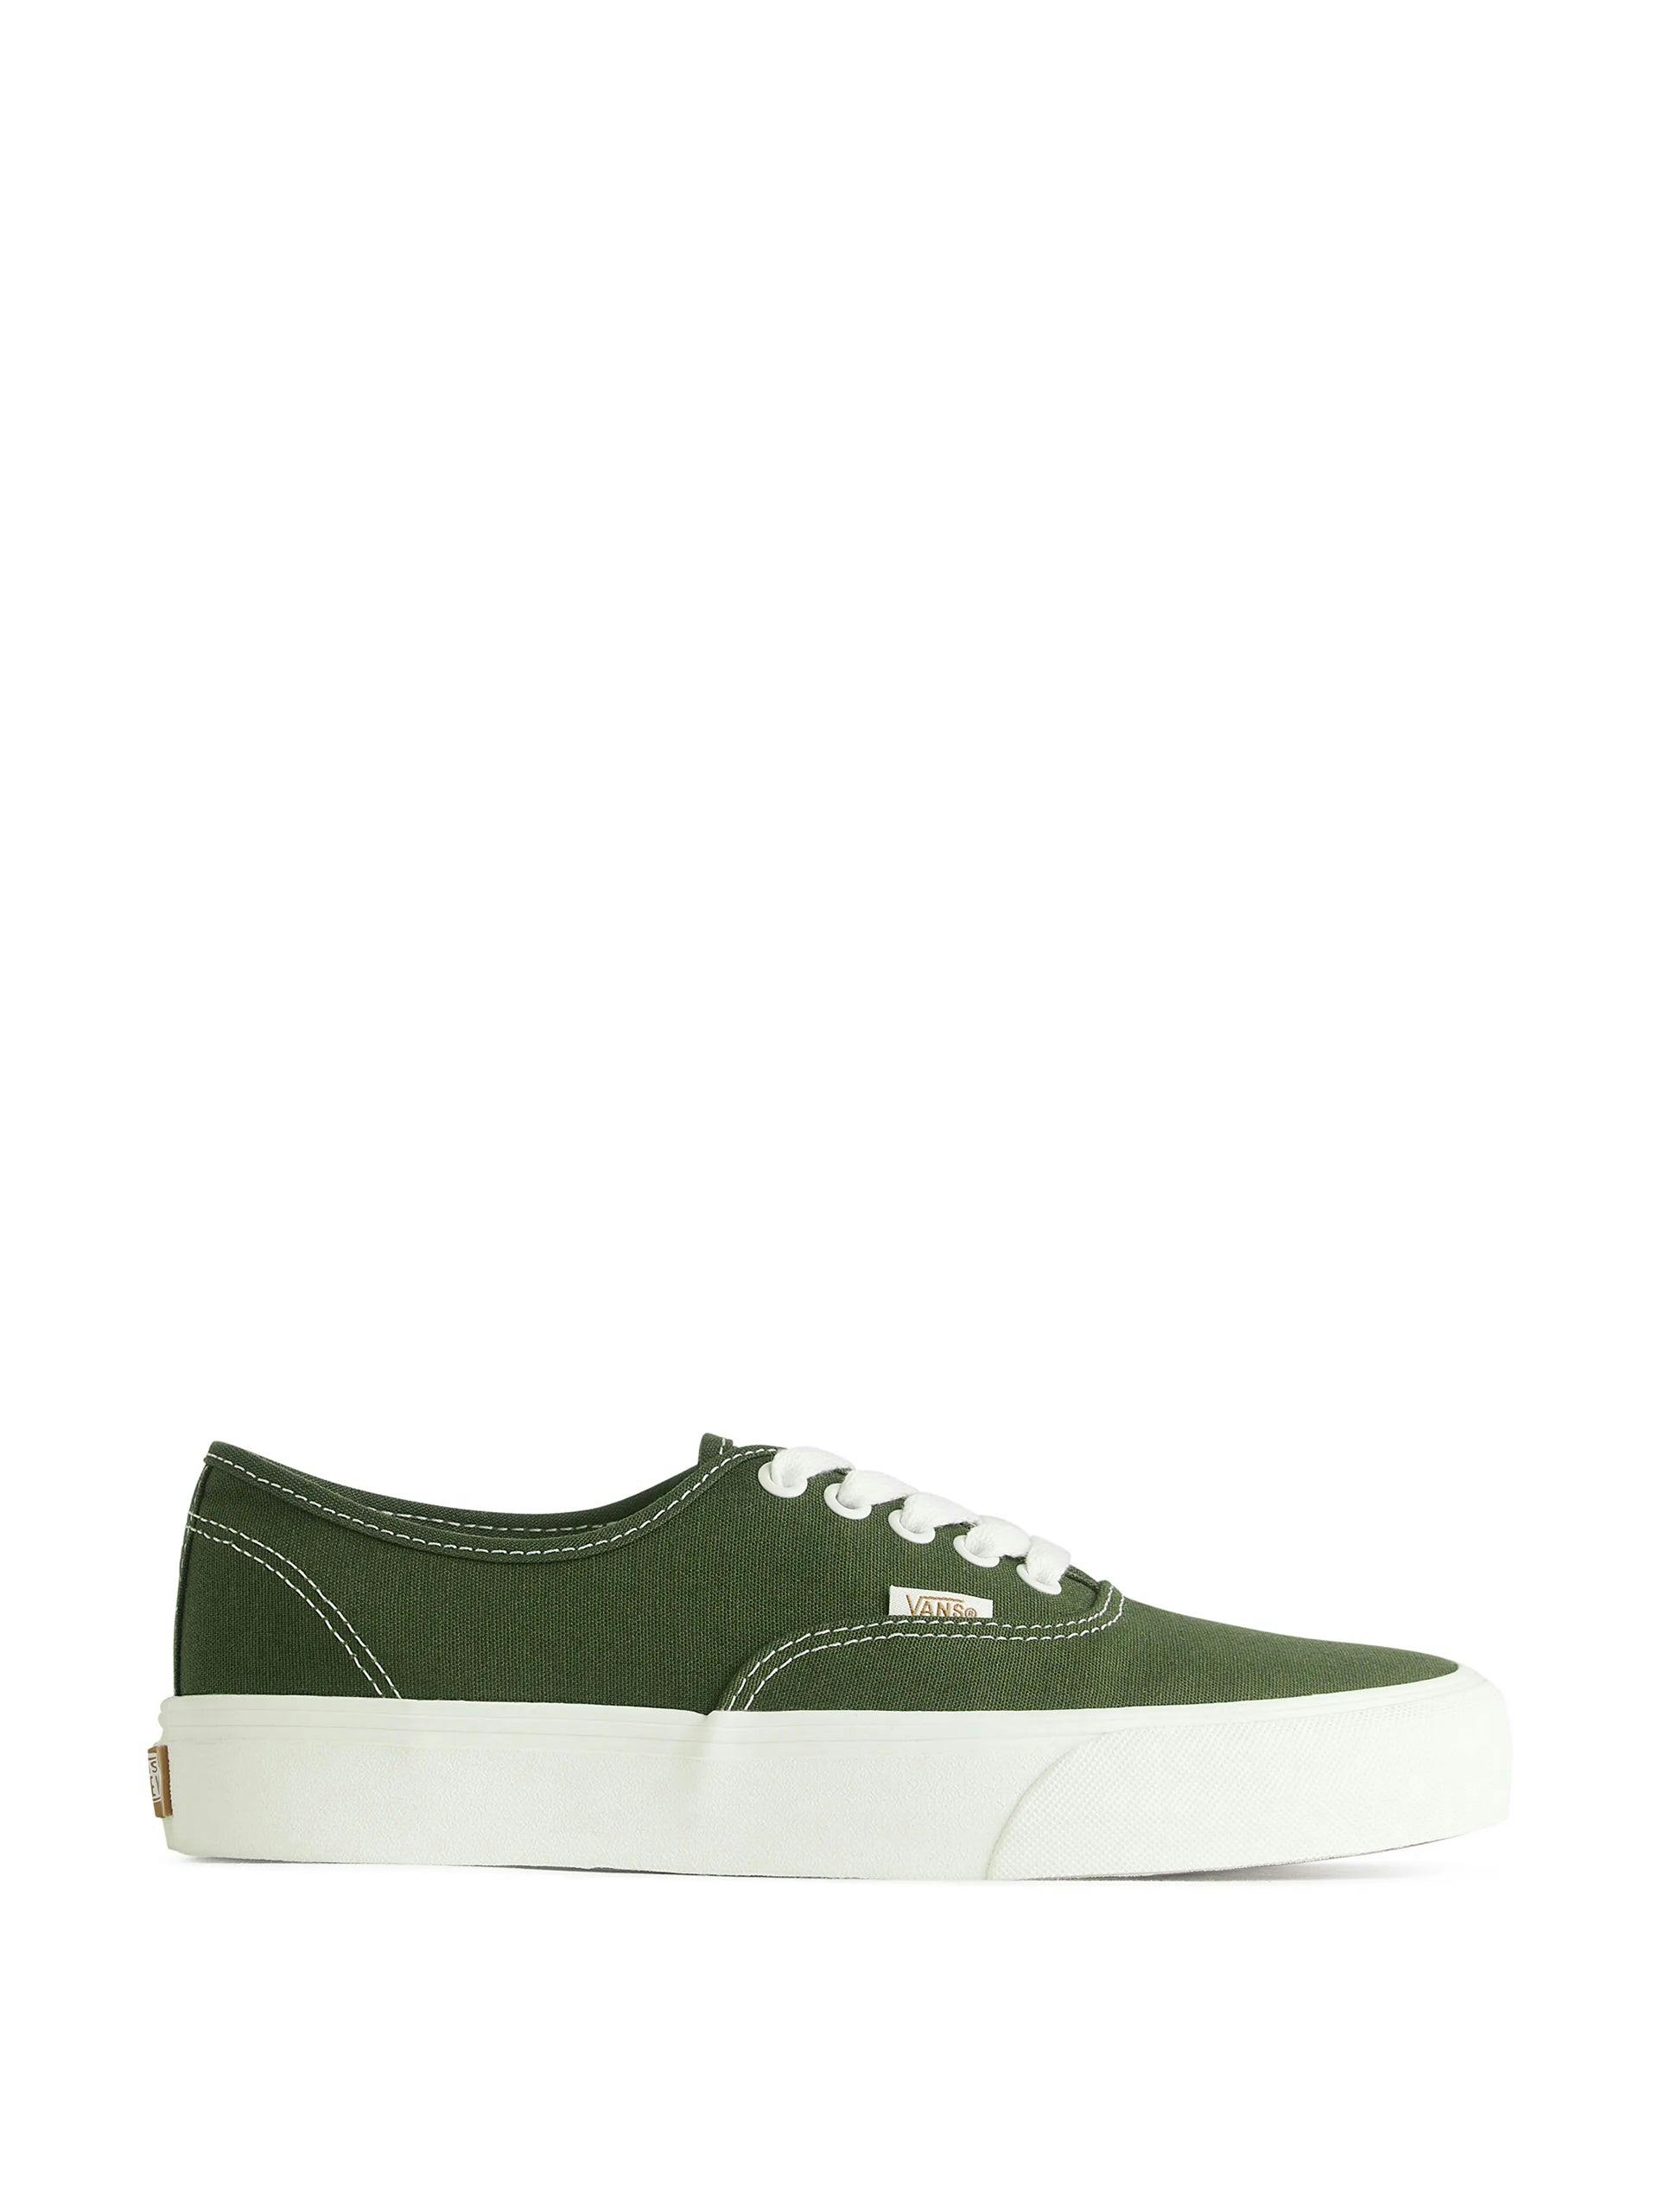 Anaheim Authentic VR3 Trainers in green